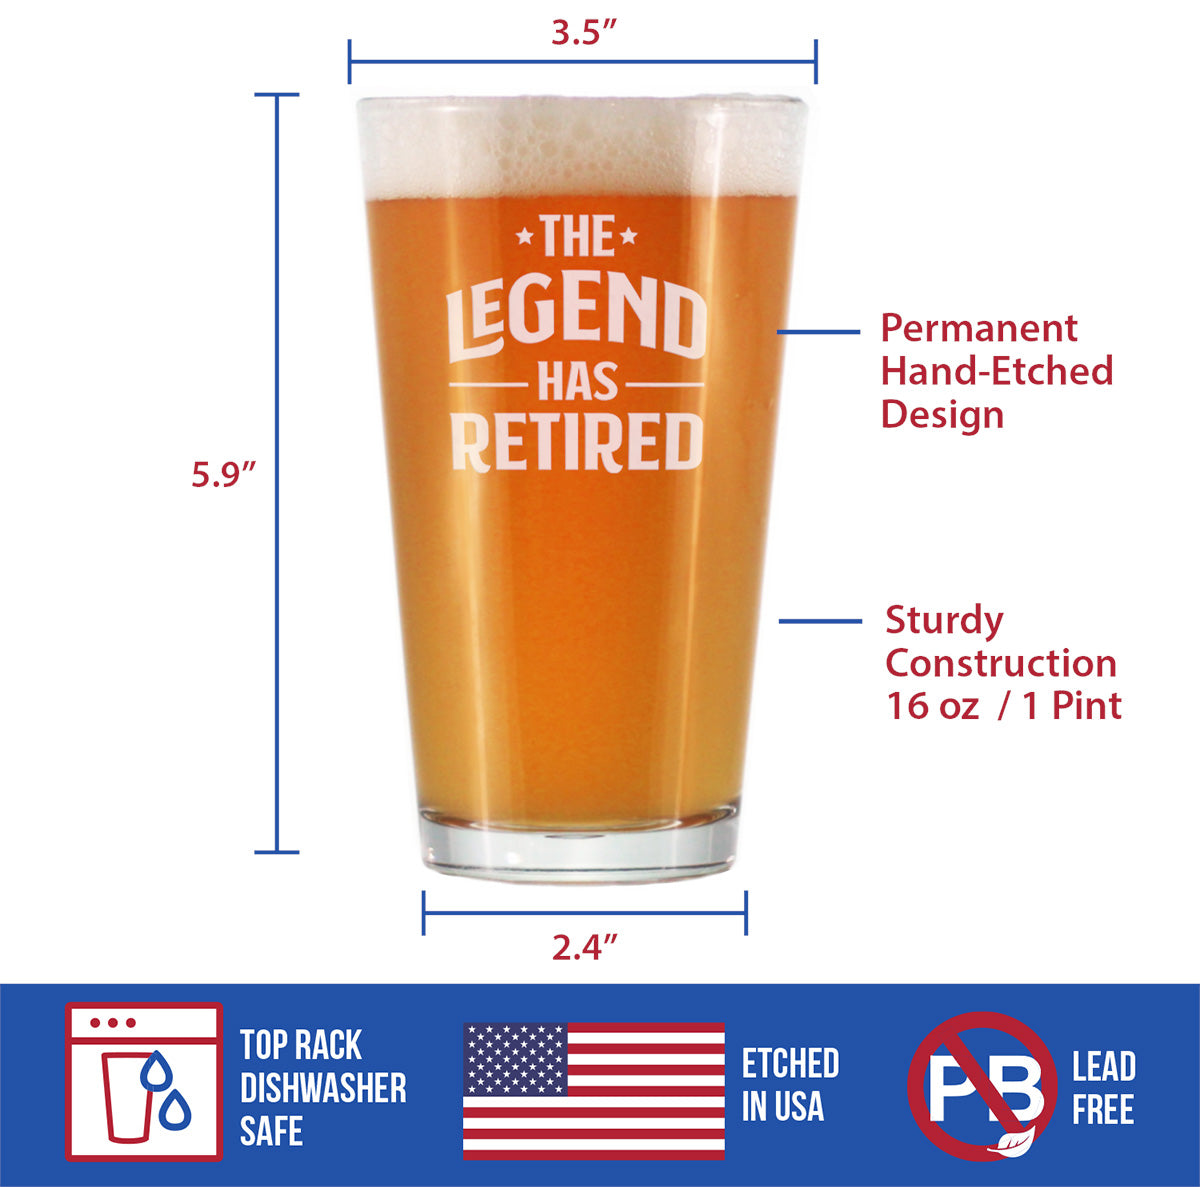 The Legend Has Retired - Pint Glass for Beer - Funny Retirement Gifts for Boss or Coworkers - 16 Oz